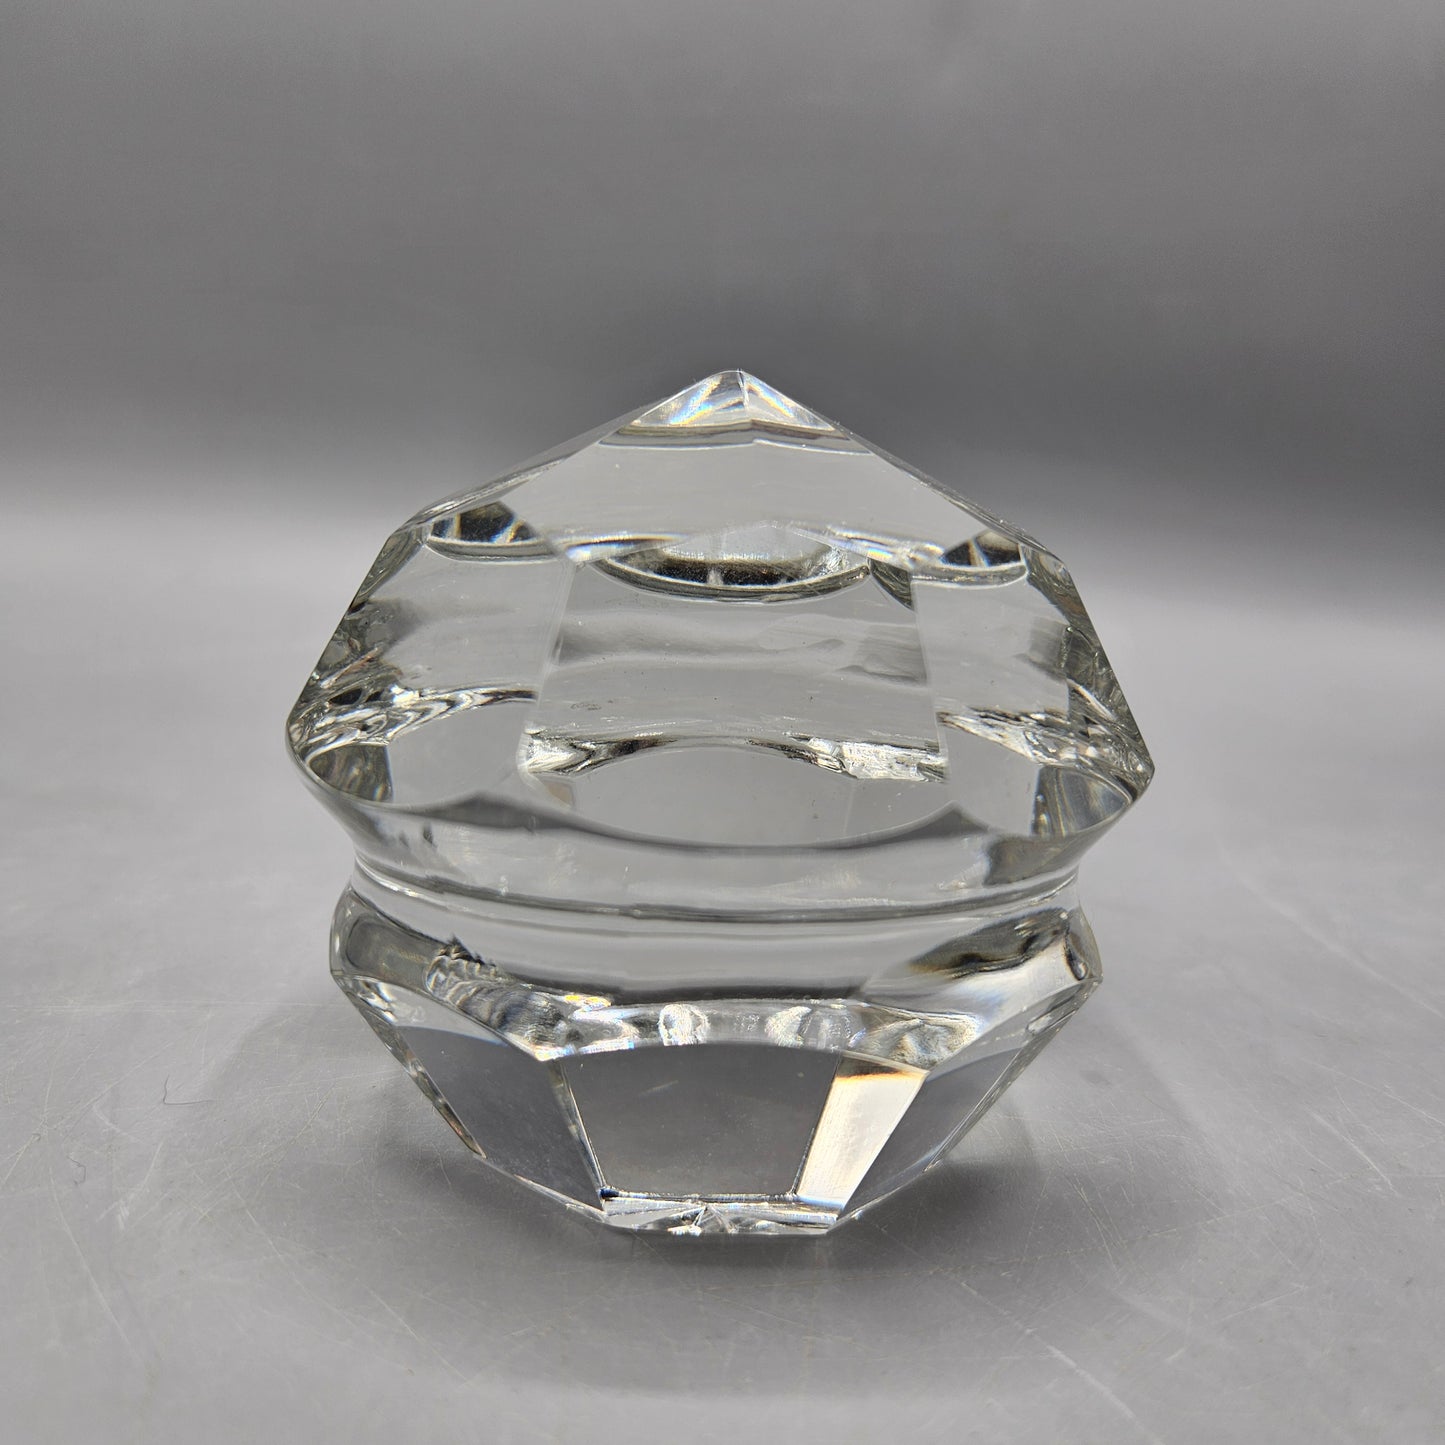 Vintage Crystal Glass Ball Paperweight